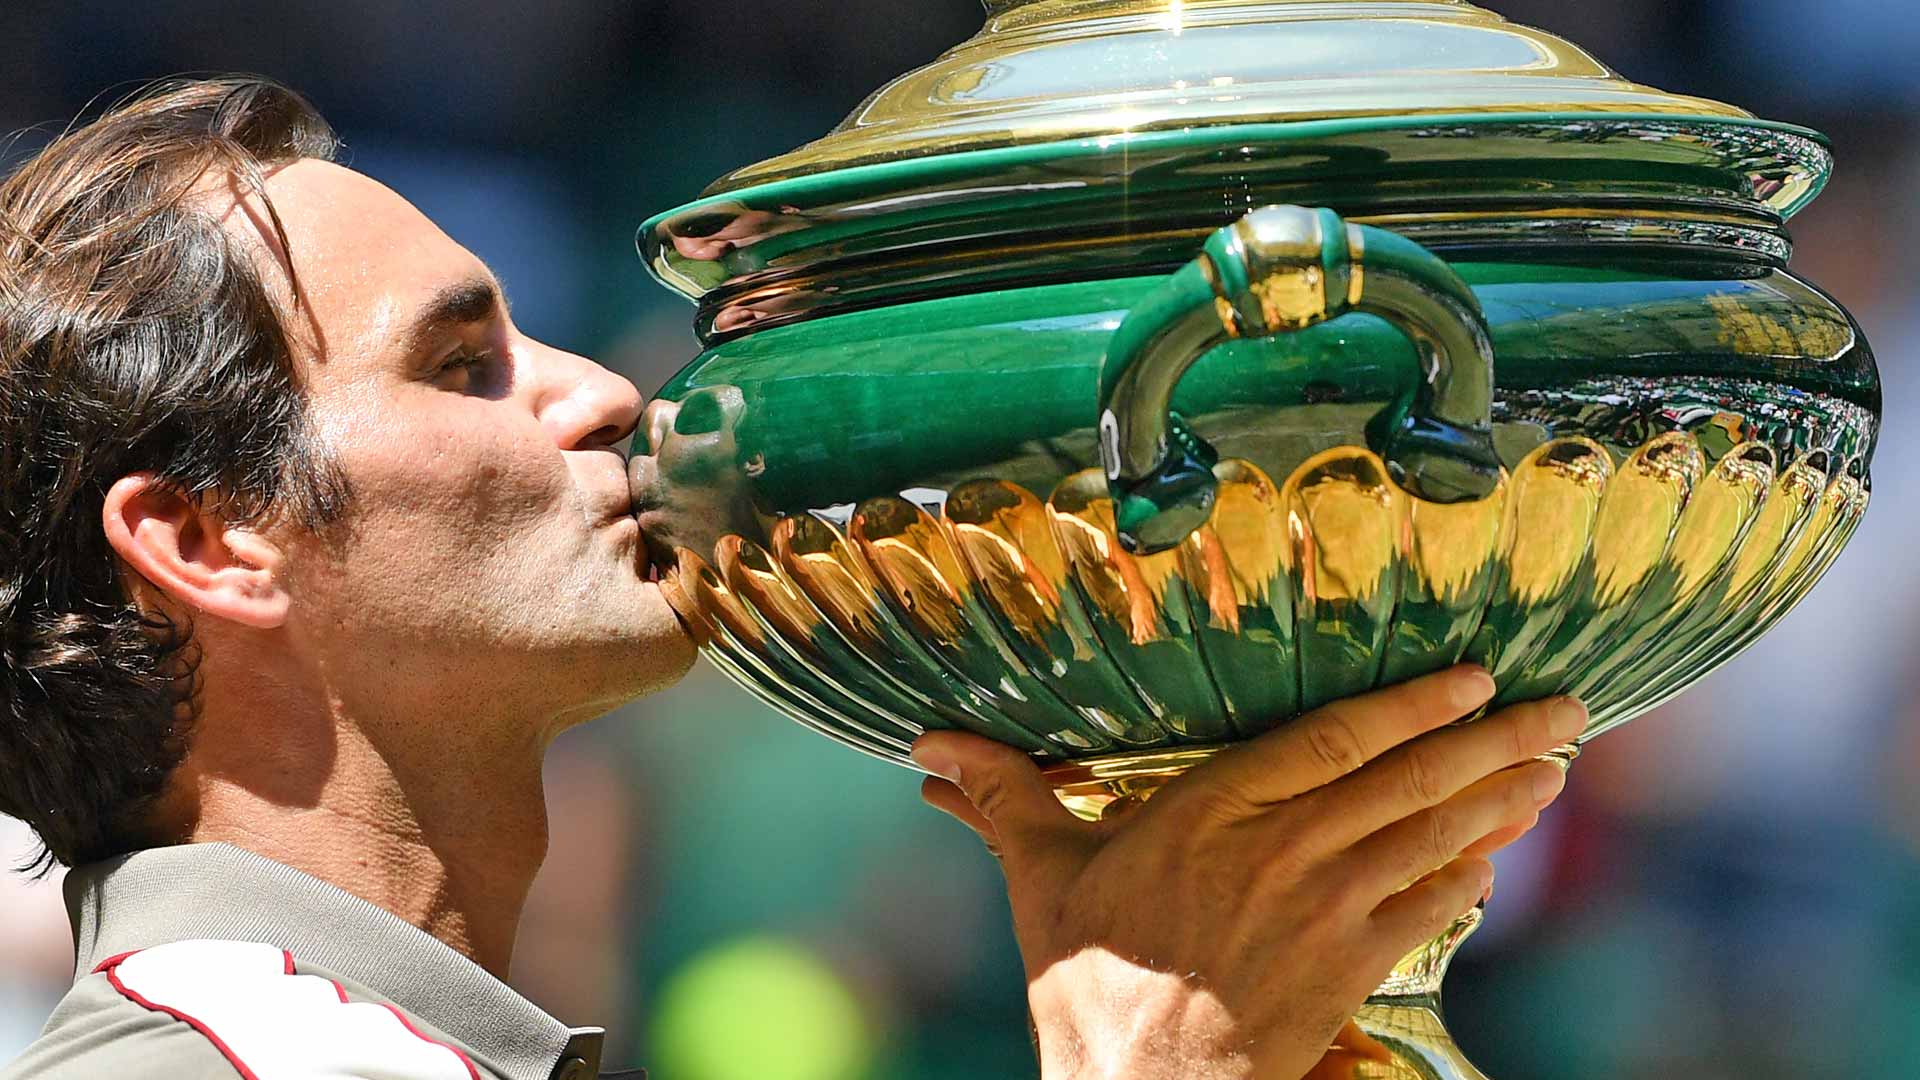 Roger Federer celebrates his 10th Halle trophy, which is also his 102nd tour-level title.